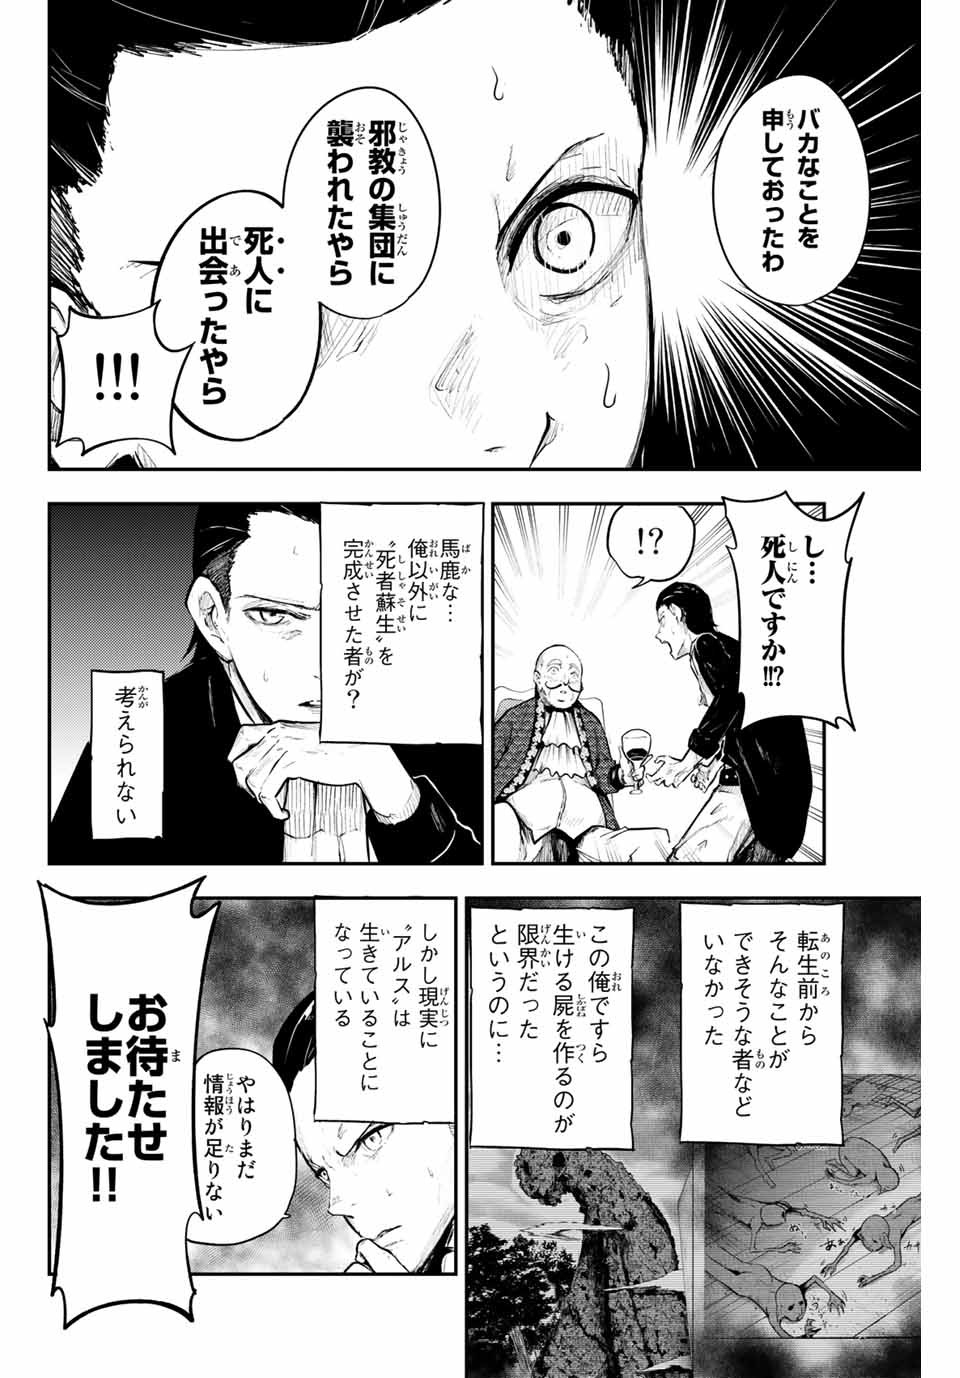 the strongest former prince-; 奴隷転生 ～その奴隷、最強の元王子につき～ 第15話 - Page 16